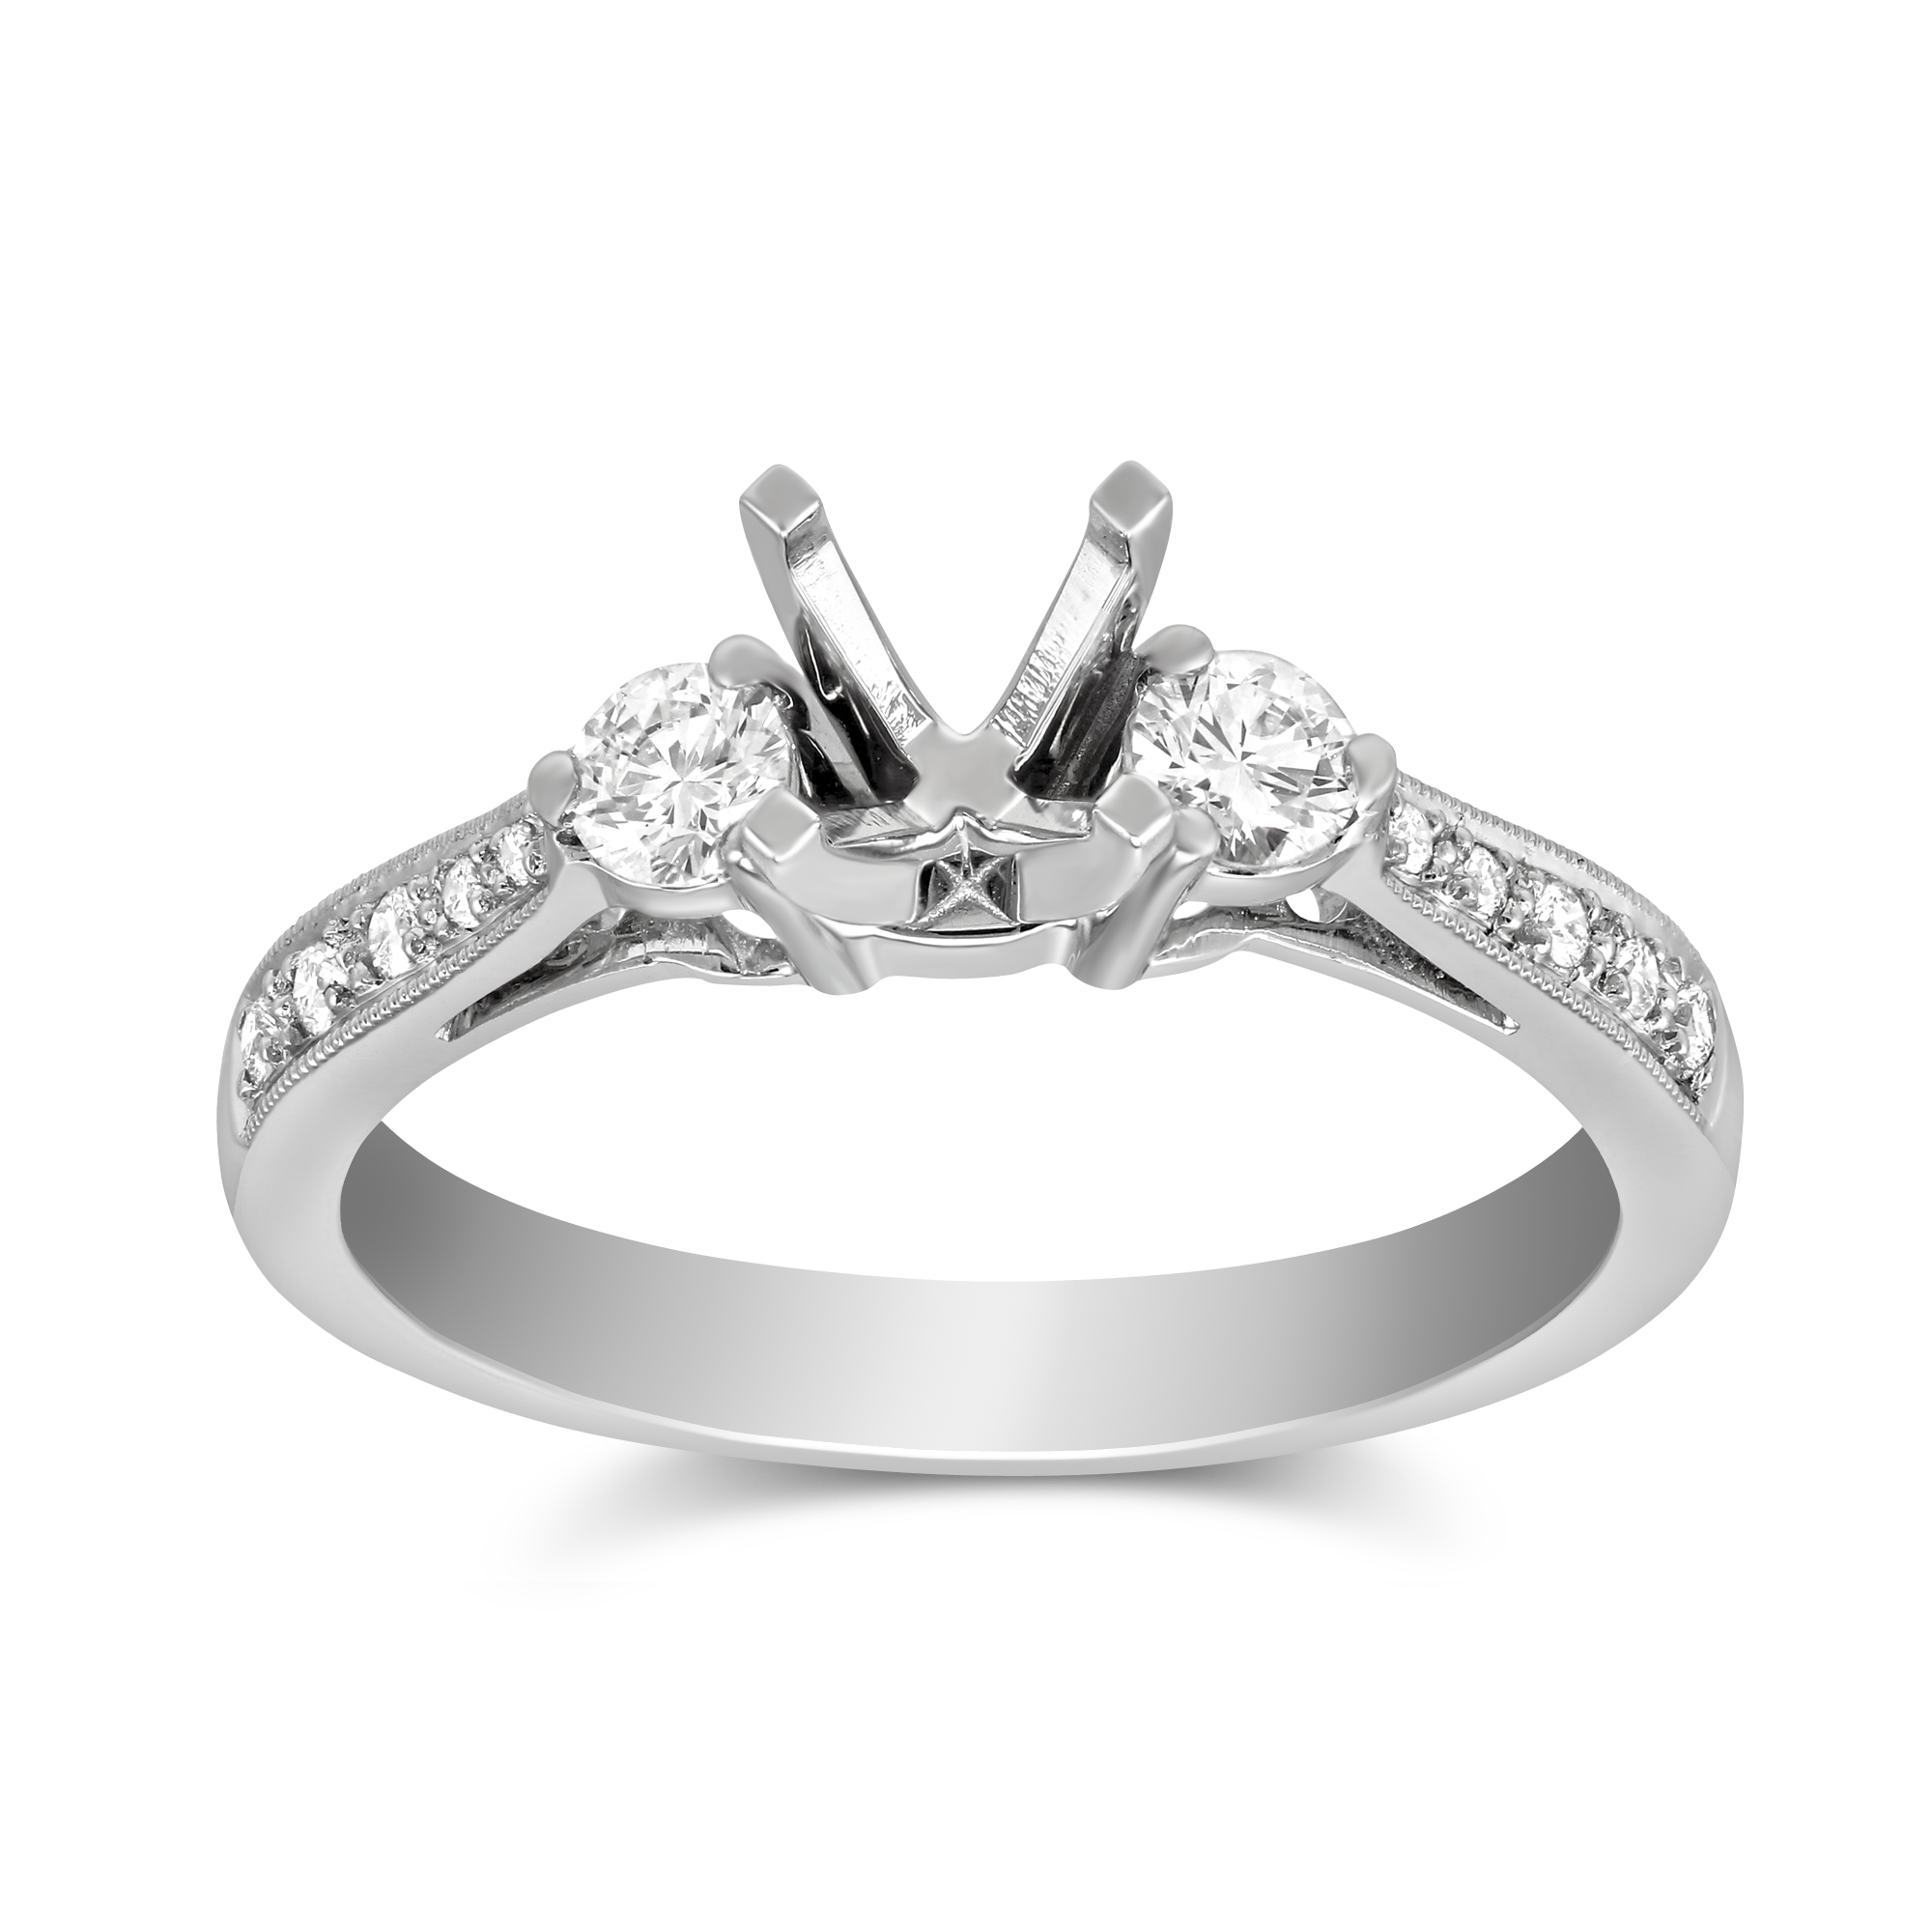 White Gold Prong and Channel Set Round Diamond Ring Setting | Borsheims